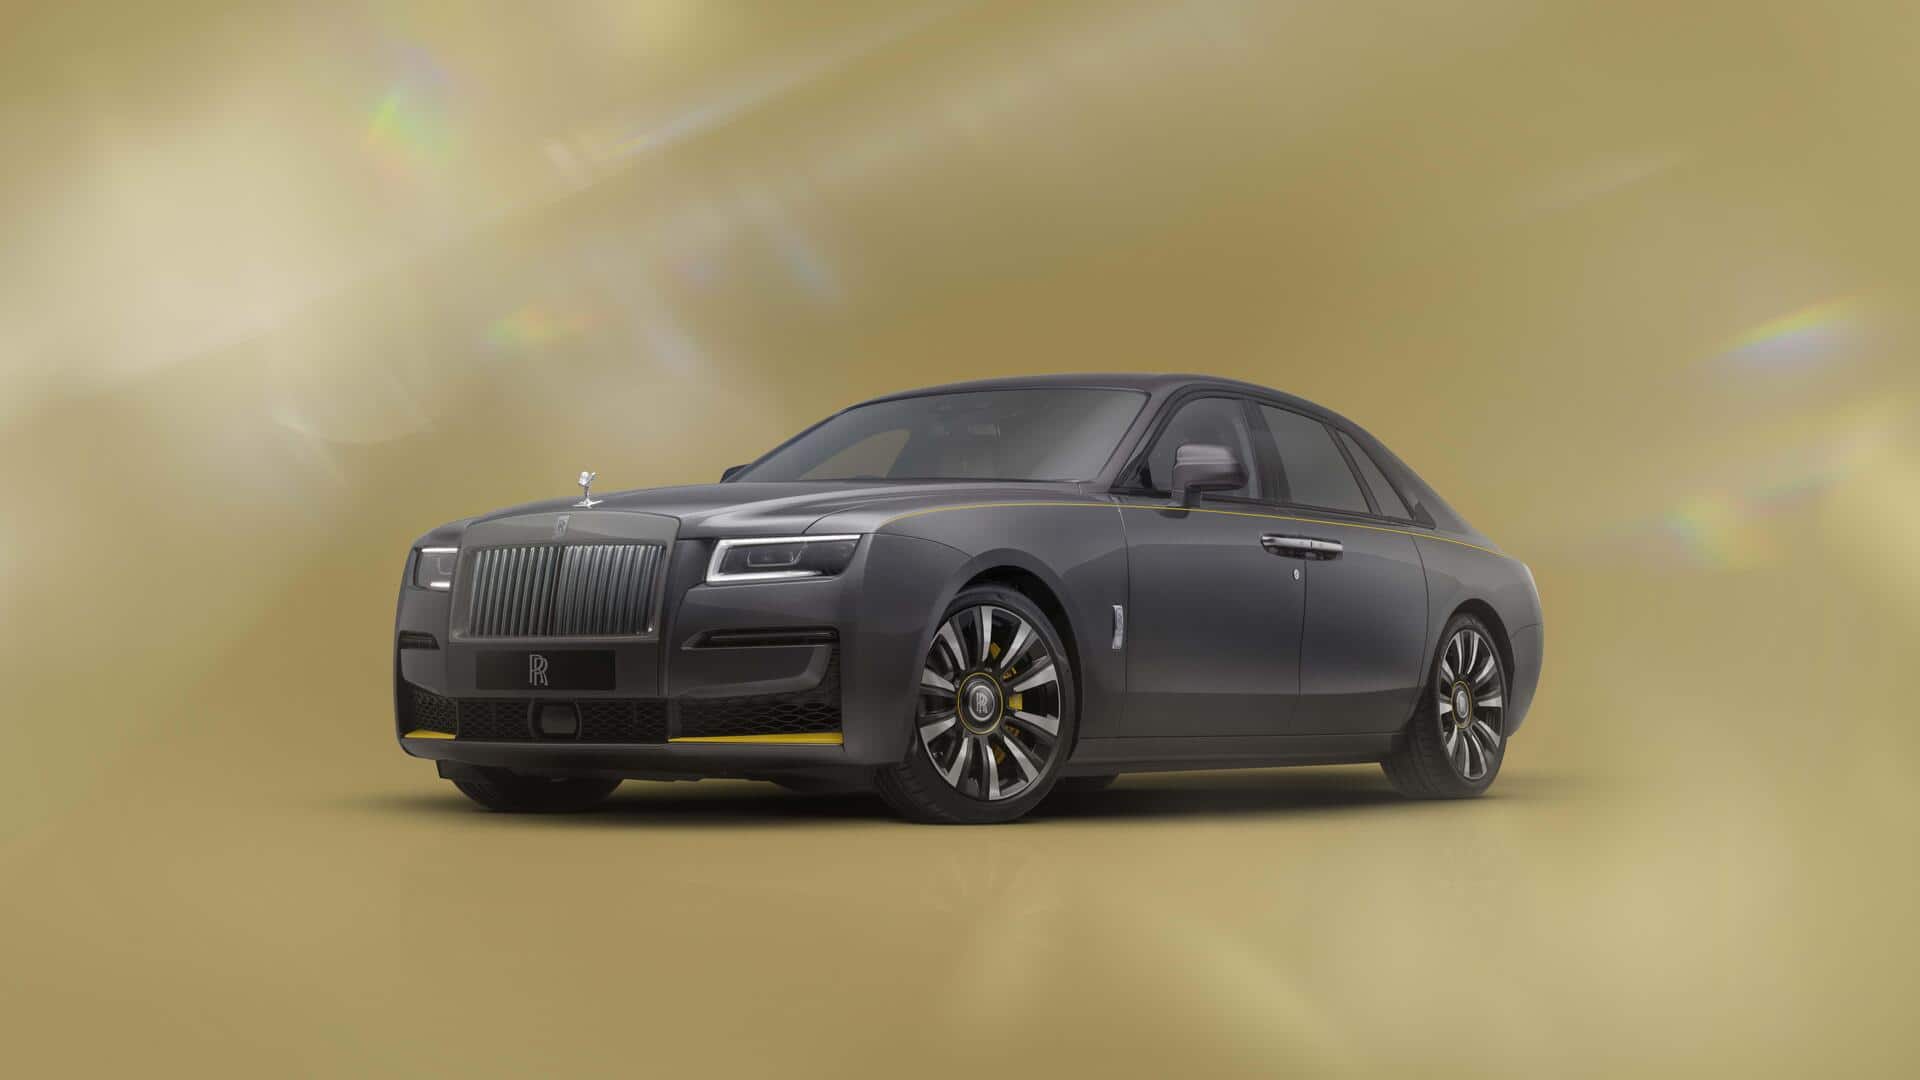 Rolls-Royce commemorates 120th anniversary with limited-run Ghost Prism